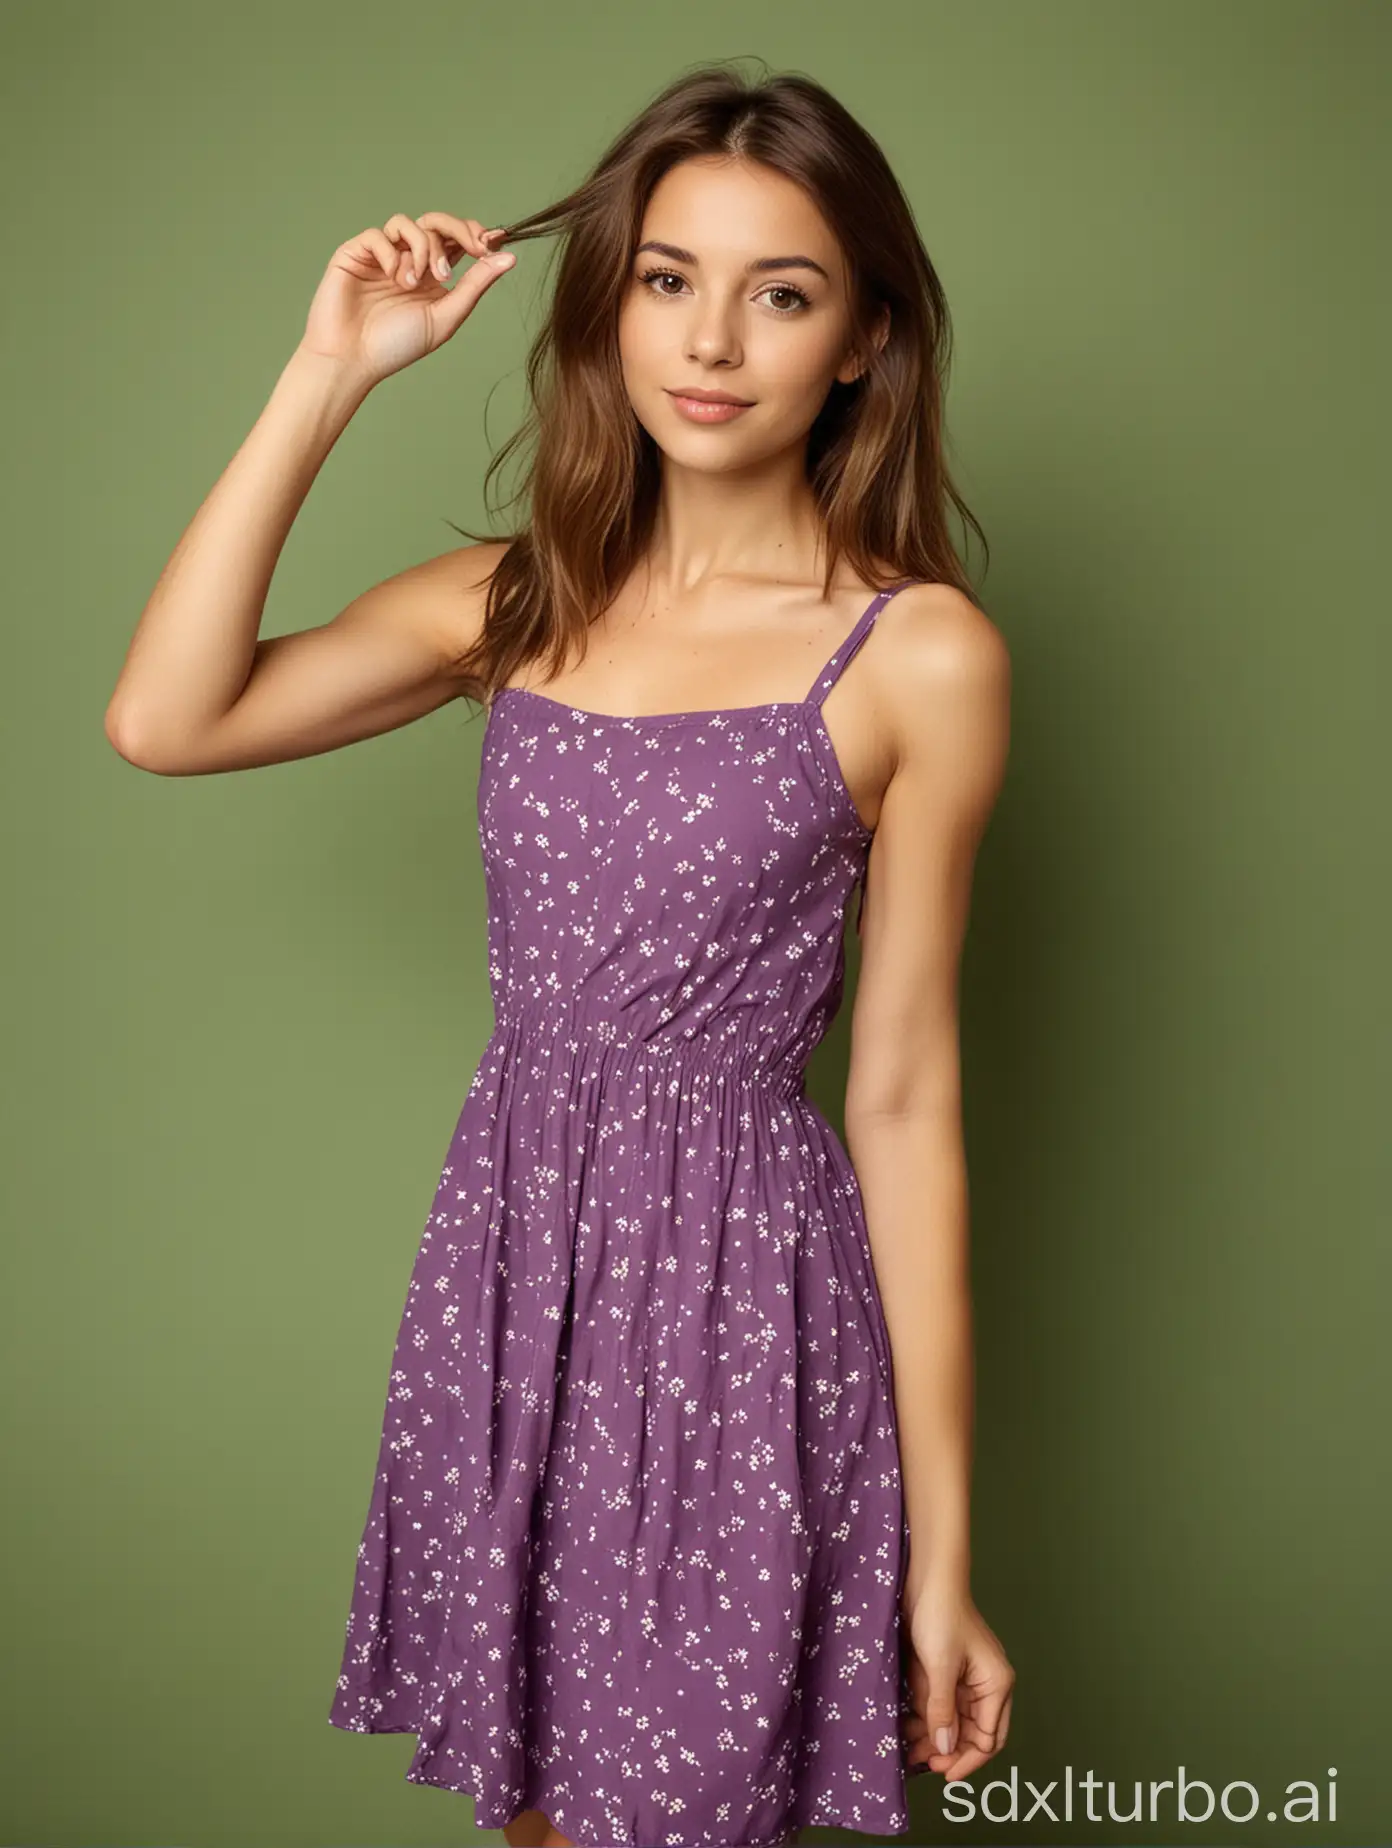 Stylish-Woman-Posing-for-a-Selfie-in-a-Purple-Sundress-Against-a-Green-Background